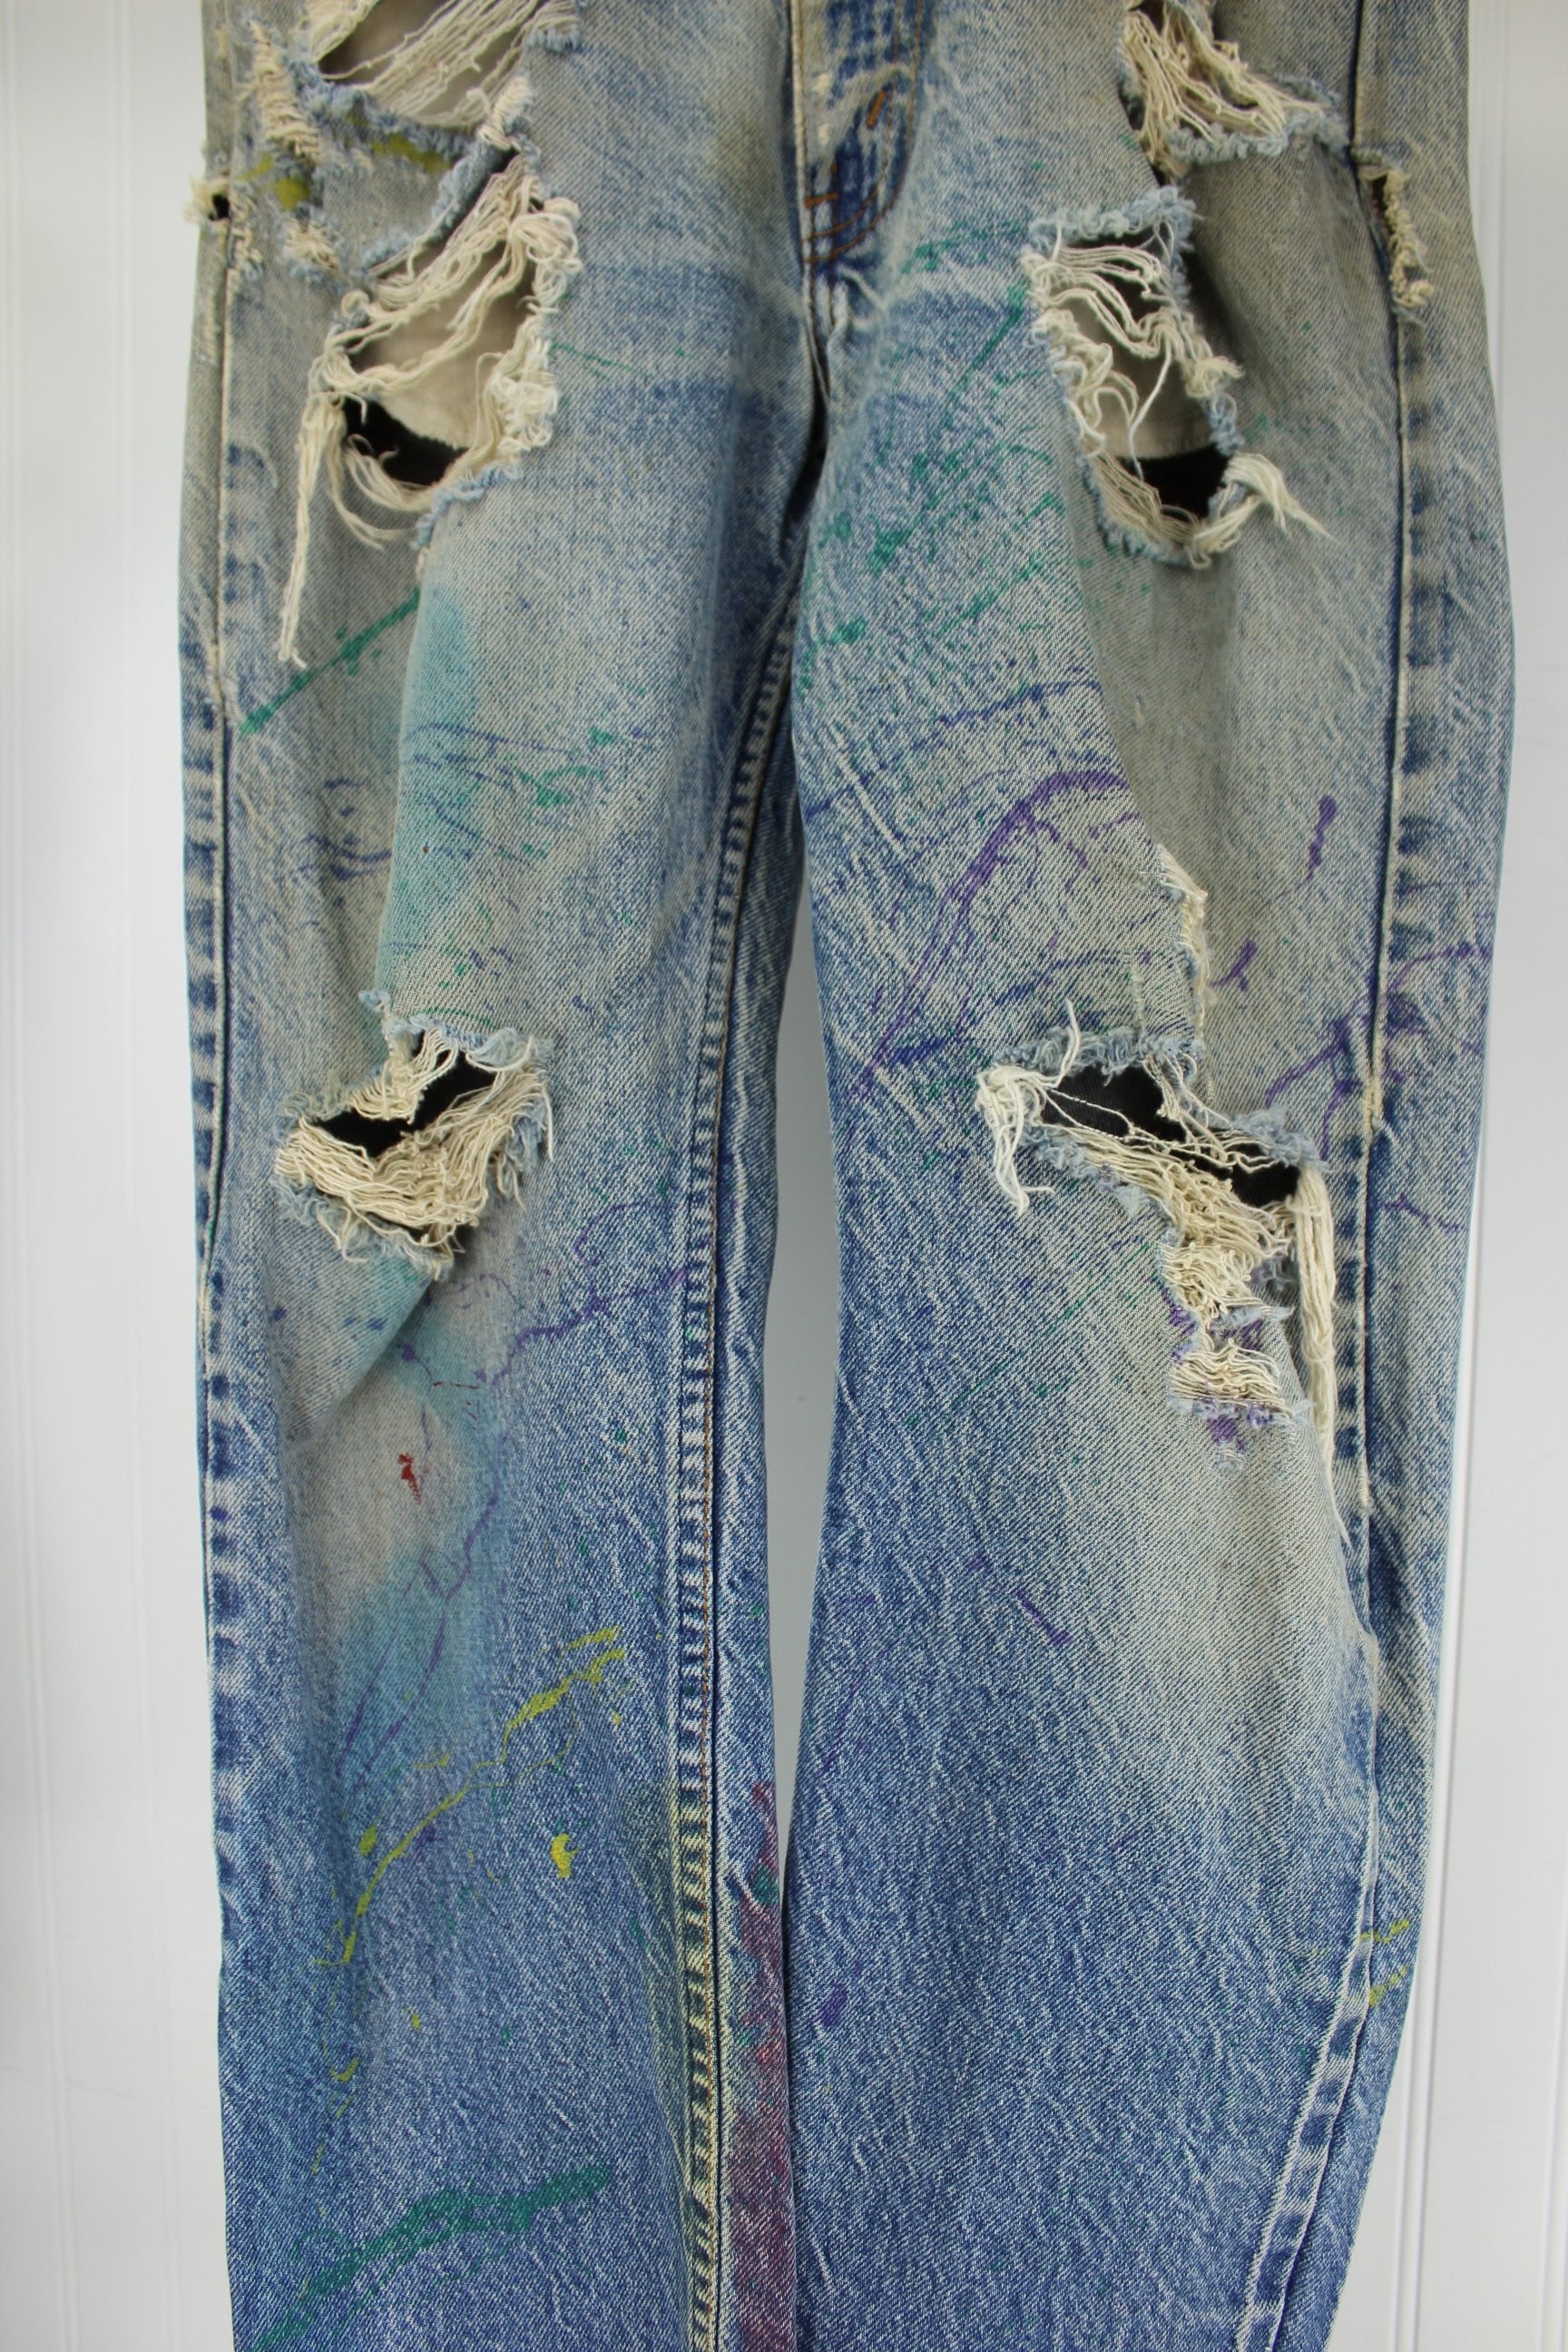 Vintage Levi's Skate Boarder Superbly Distressed Painted Jeans - Early 1990s - Waist 30" Orange Tab fun to wear